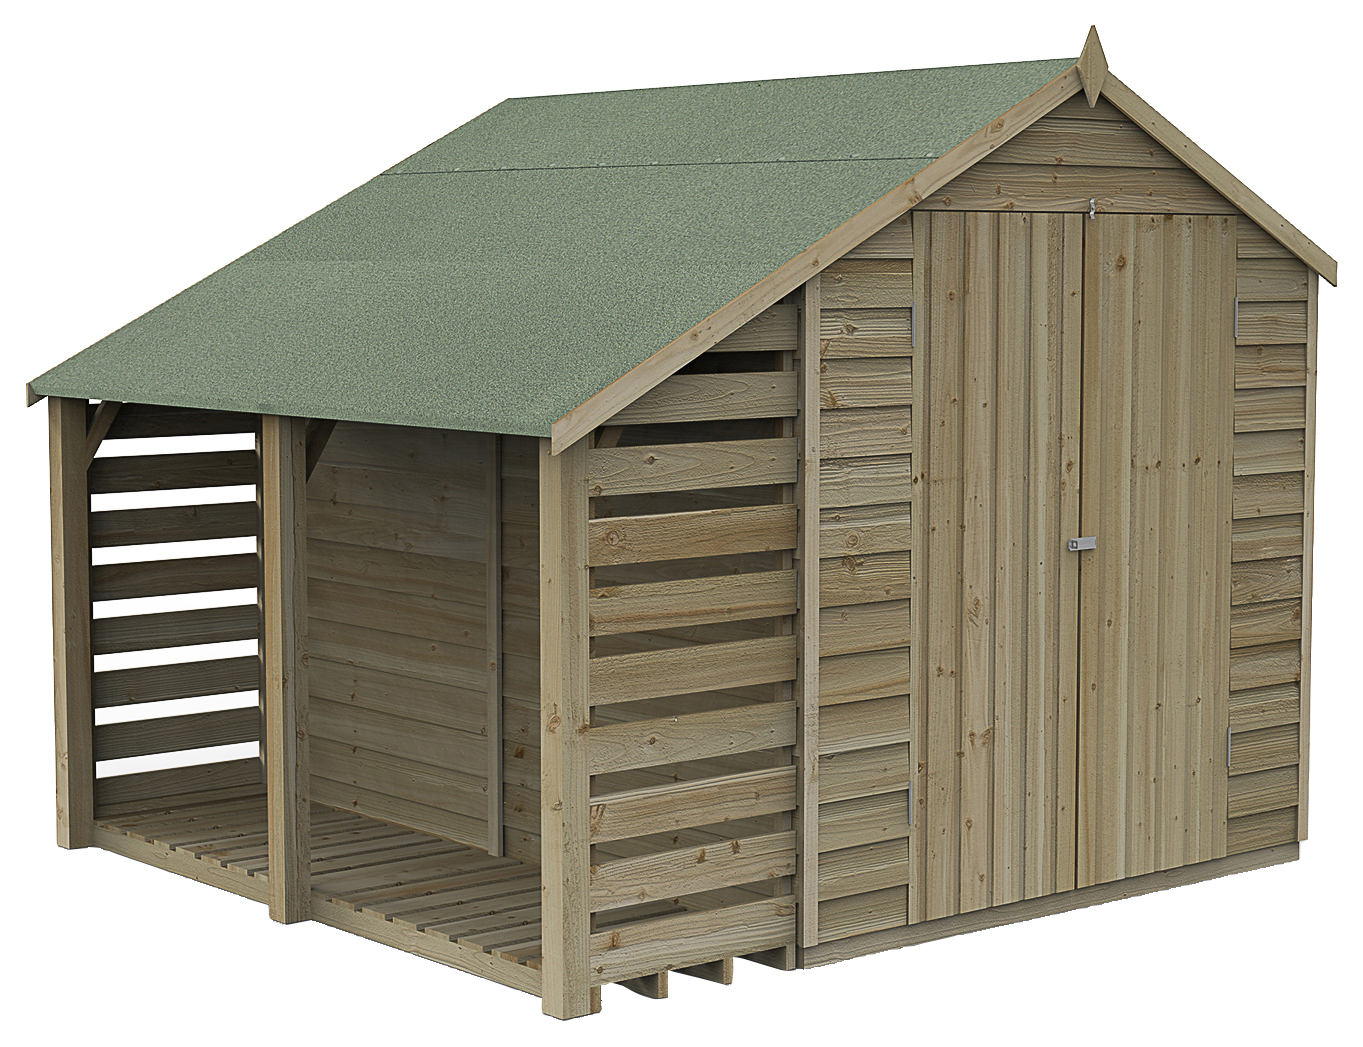 Forest Garden 8 x 6ft 4Life Apex Overlap Pressure Treated Double Door Windowless Shed with Lean-To